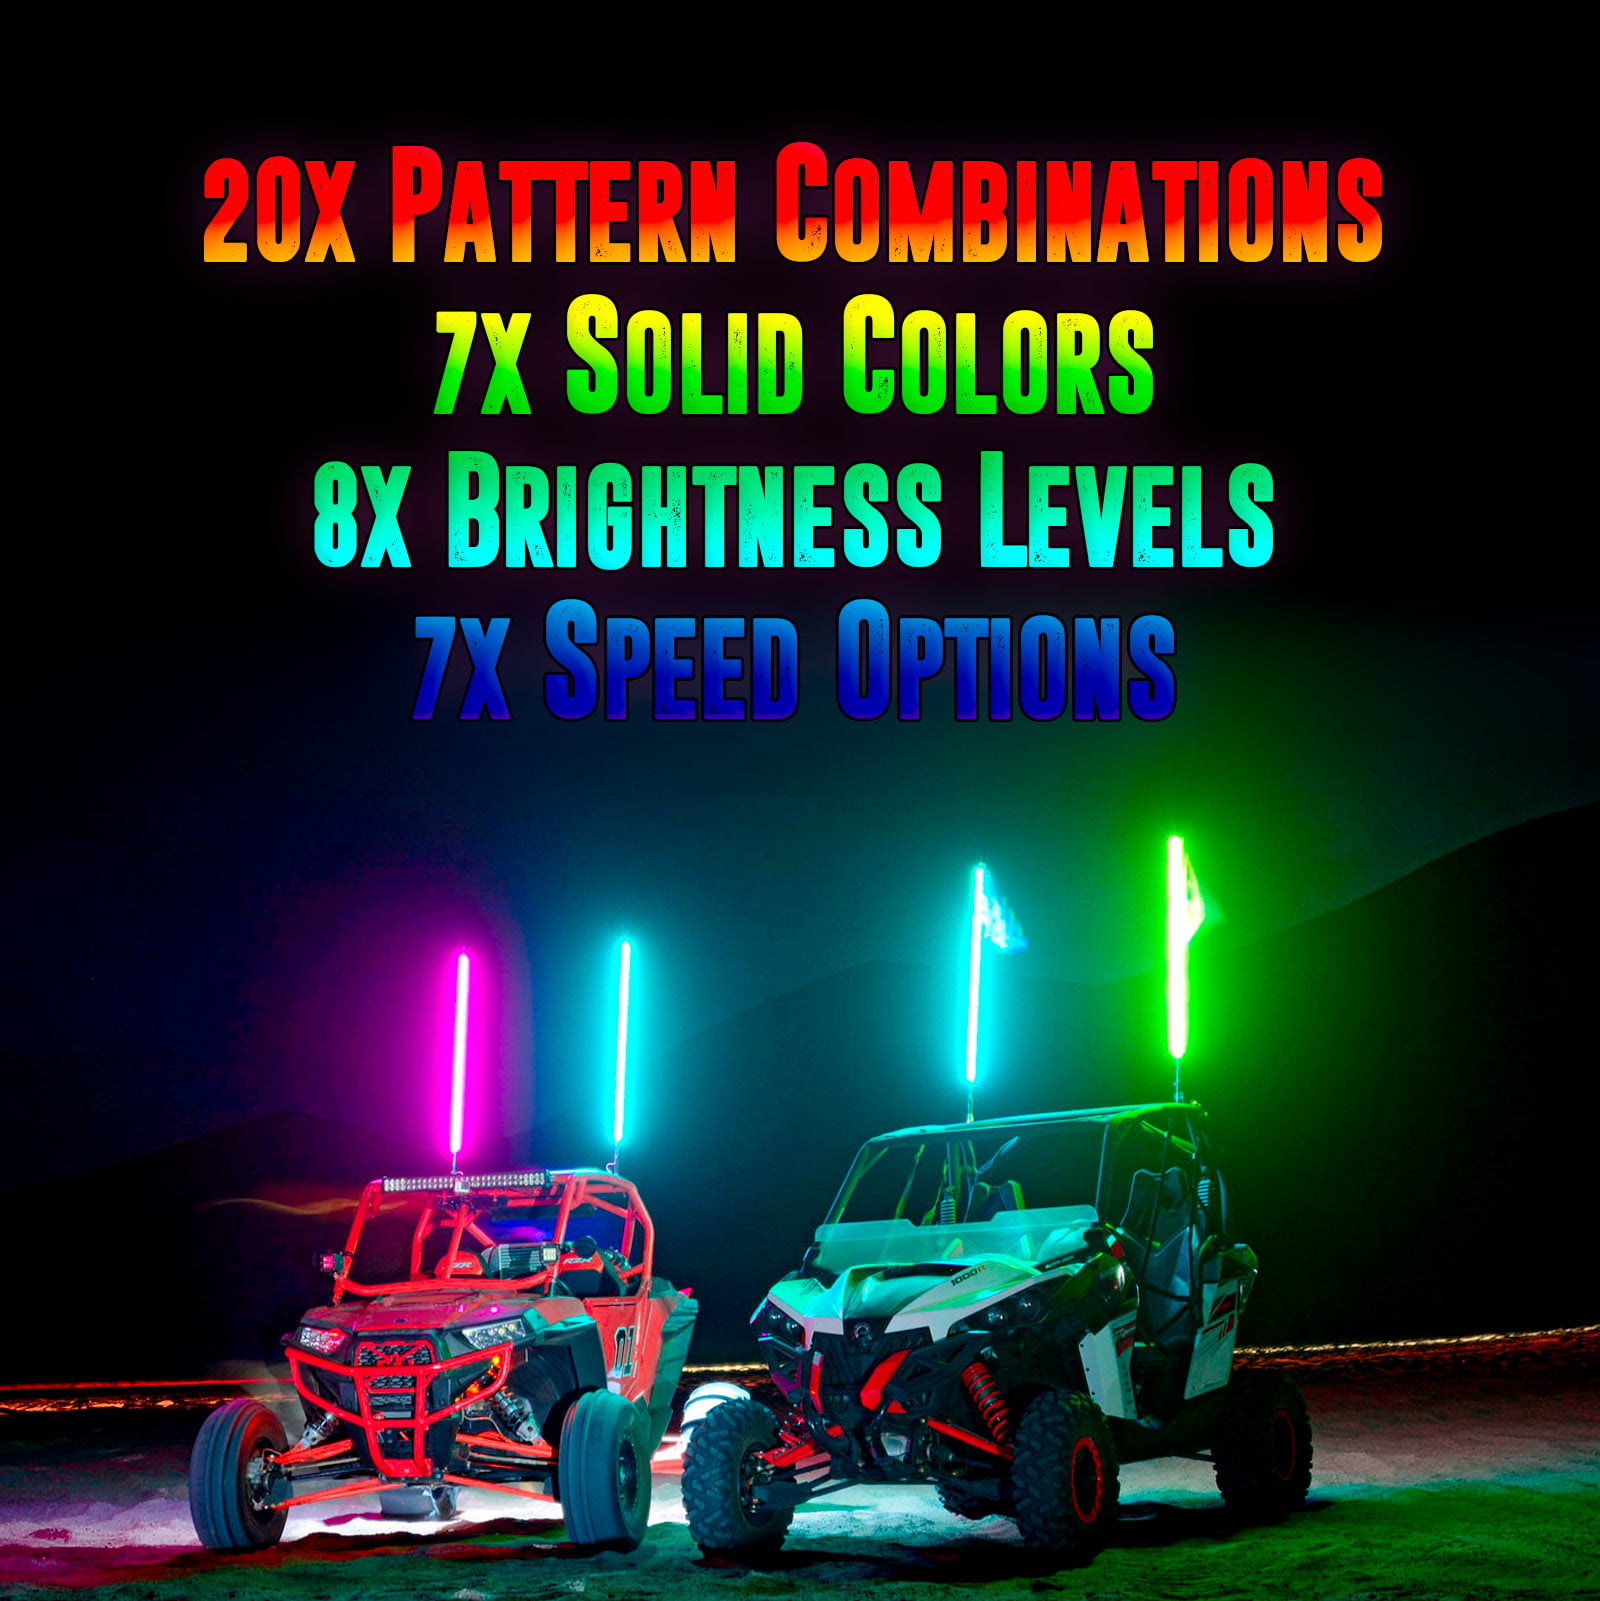 LED Antenna Whip Light for Sand Dune Buggy Trucks and Other Off-Road Vehicles Jeep RZR ATV 3ft Multi-Color LED Whip Light with Remote Control and American USA Flag UTV 